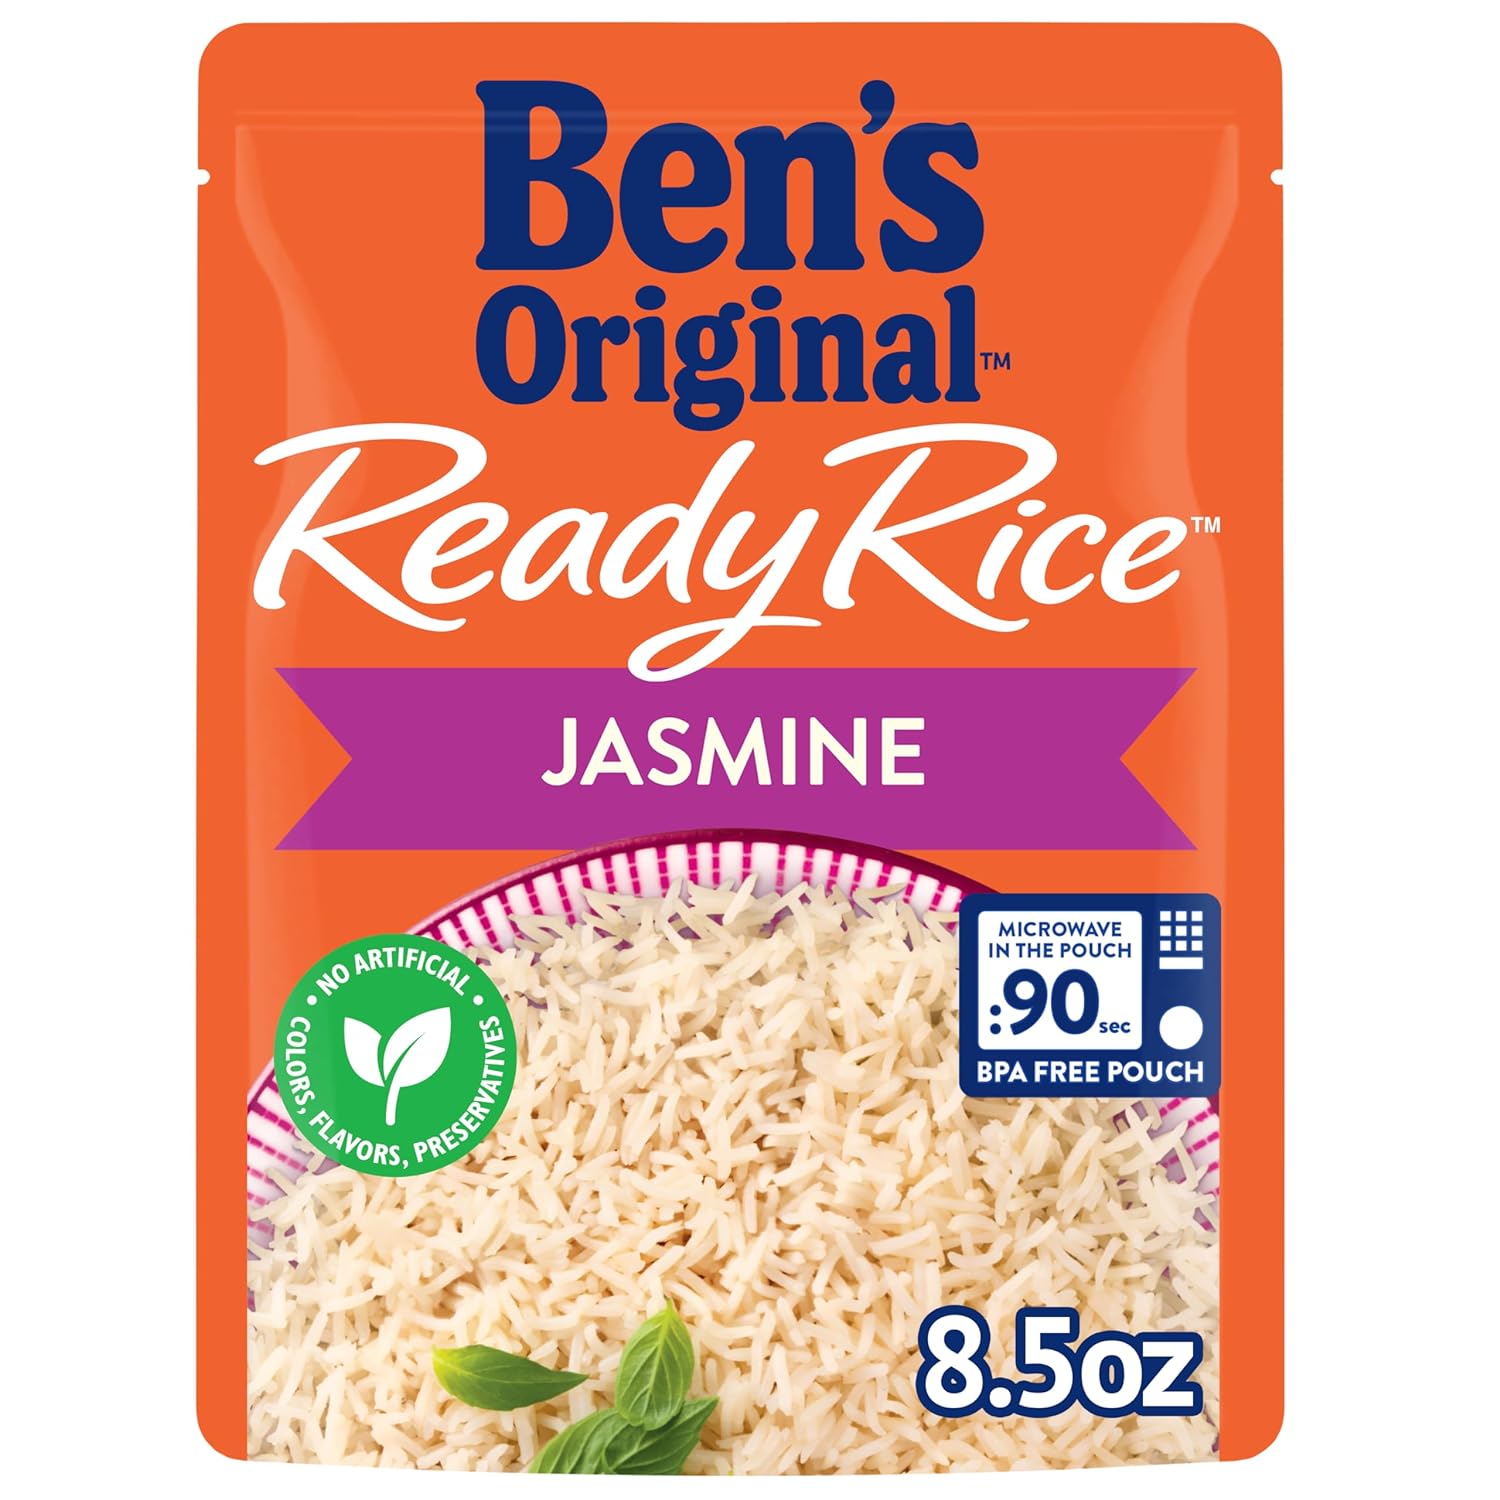 BEN'S ORIGINAL Ready Rice Jasmine Rice, Easy Dinner Side, 8.5 OZ Pouch (Pack of 12)